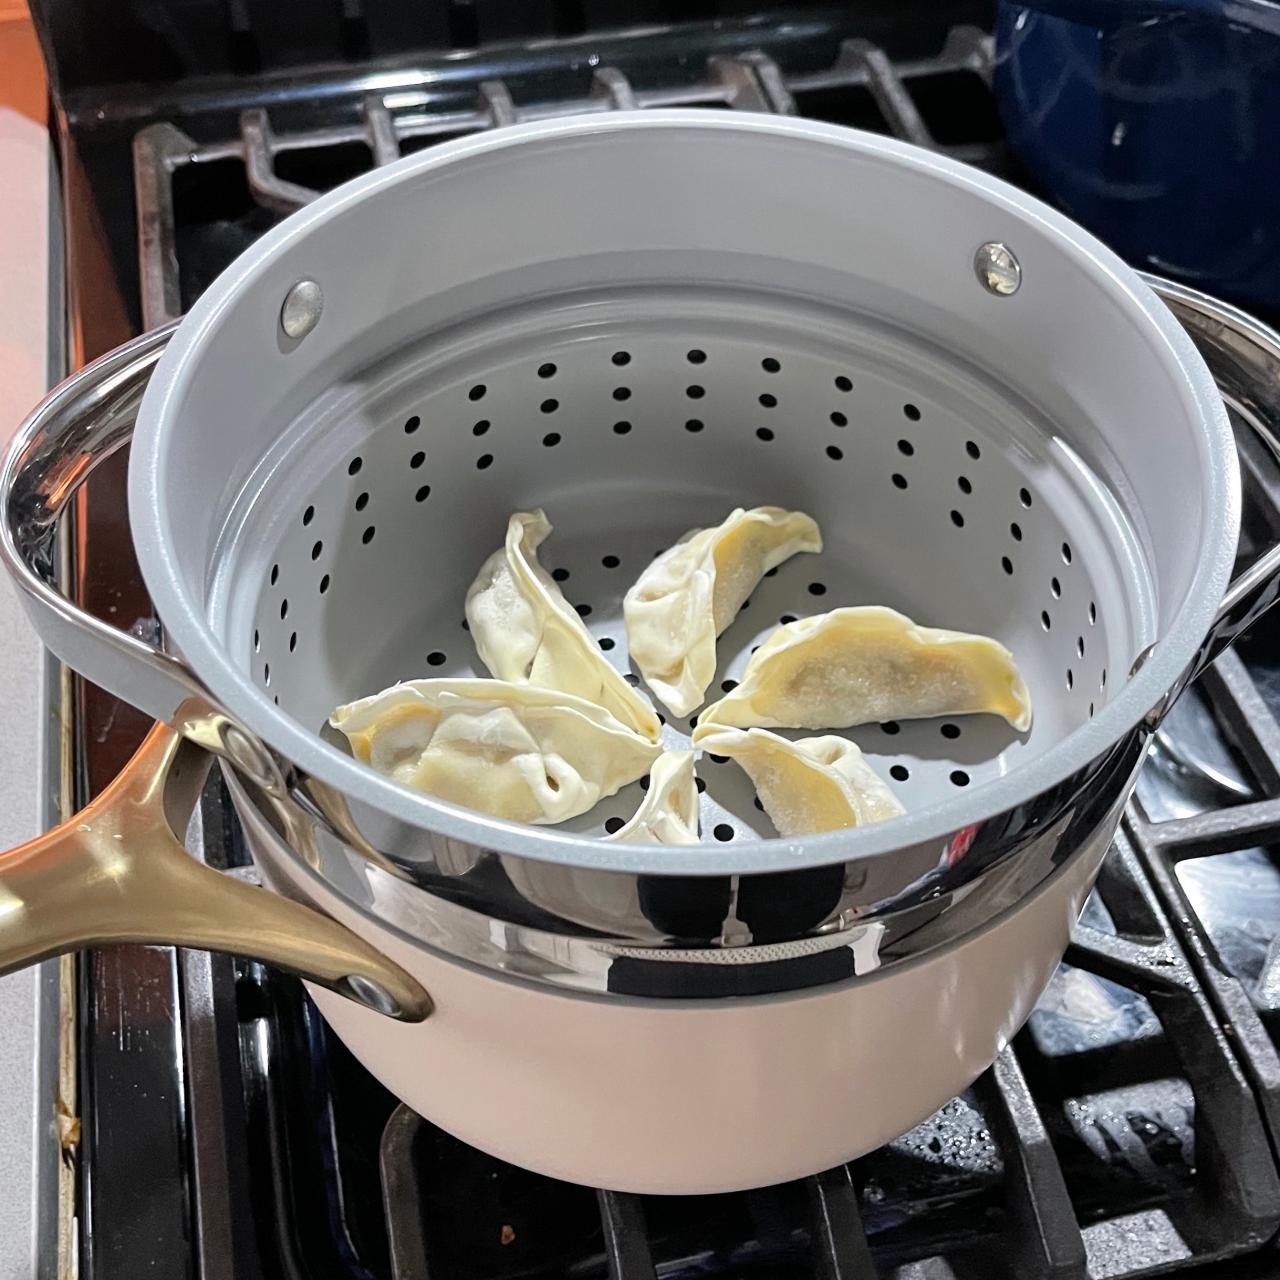 https://food.fnr.sndimg.com/content/dam/images/food/products/2023/4/18/rx_Caraway-Steamer-Duo.jpg.rend.hgtvcom.1280.1280.suffix/1681848245000.jpeg